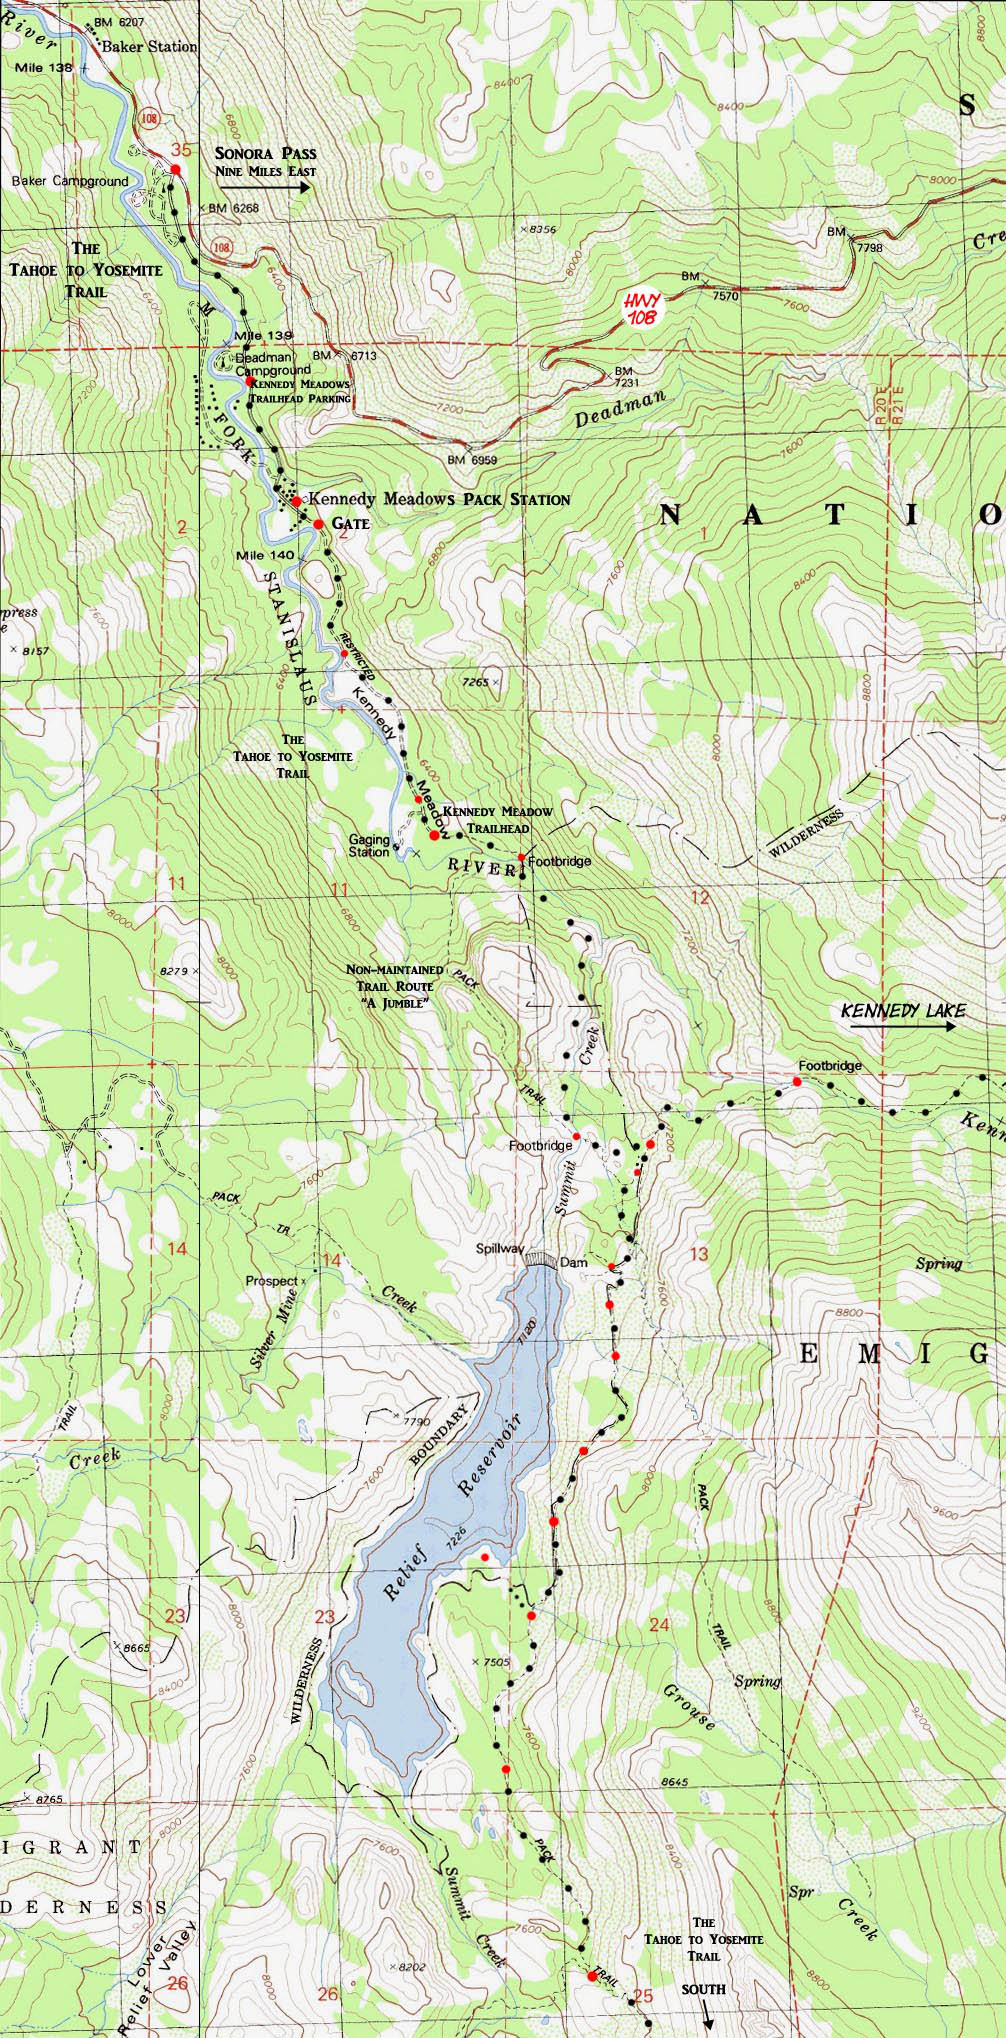  Kennedy Meadows Pack Station topo map to Relief Reservoir.